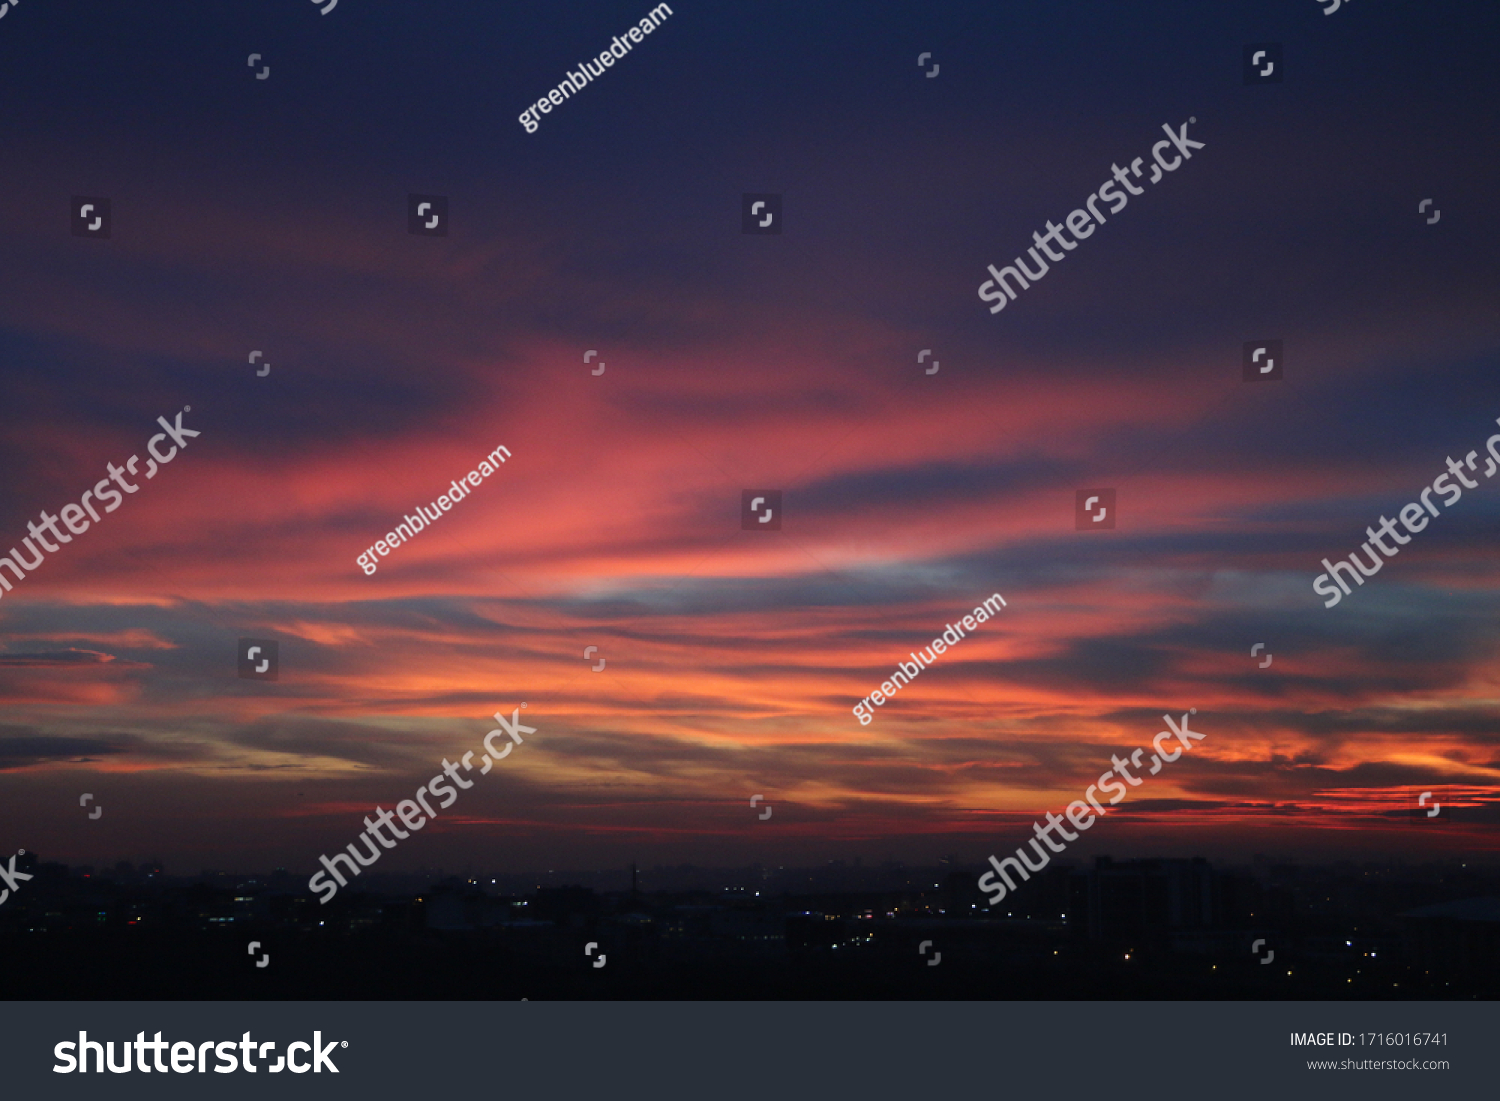 Natural Sunset Sunrise Over Field Or Meadow. Bright Dramatic Sky And Dark Ground. Countryside Landscape Under Scenic Colorful Sky At Sunset Dawn Sunrise. Sun Over Skyline, Horizon. Warm Colours. #1716016741